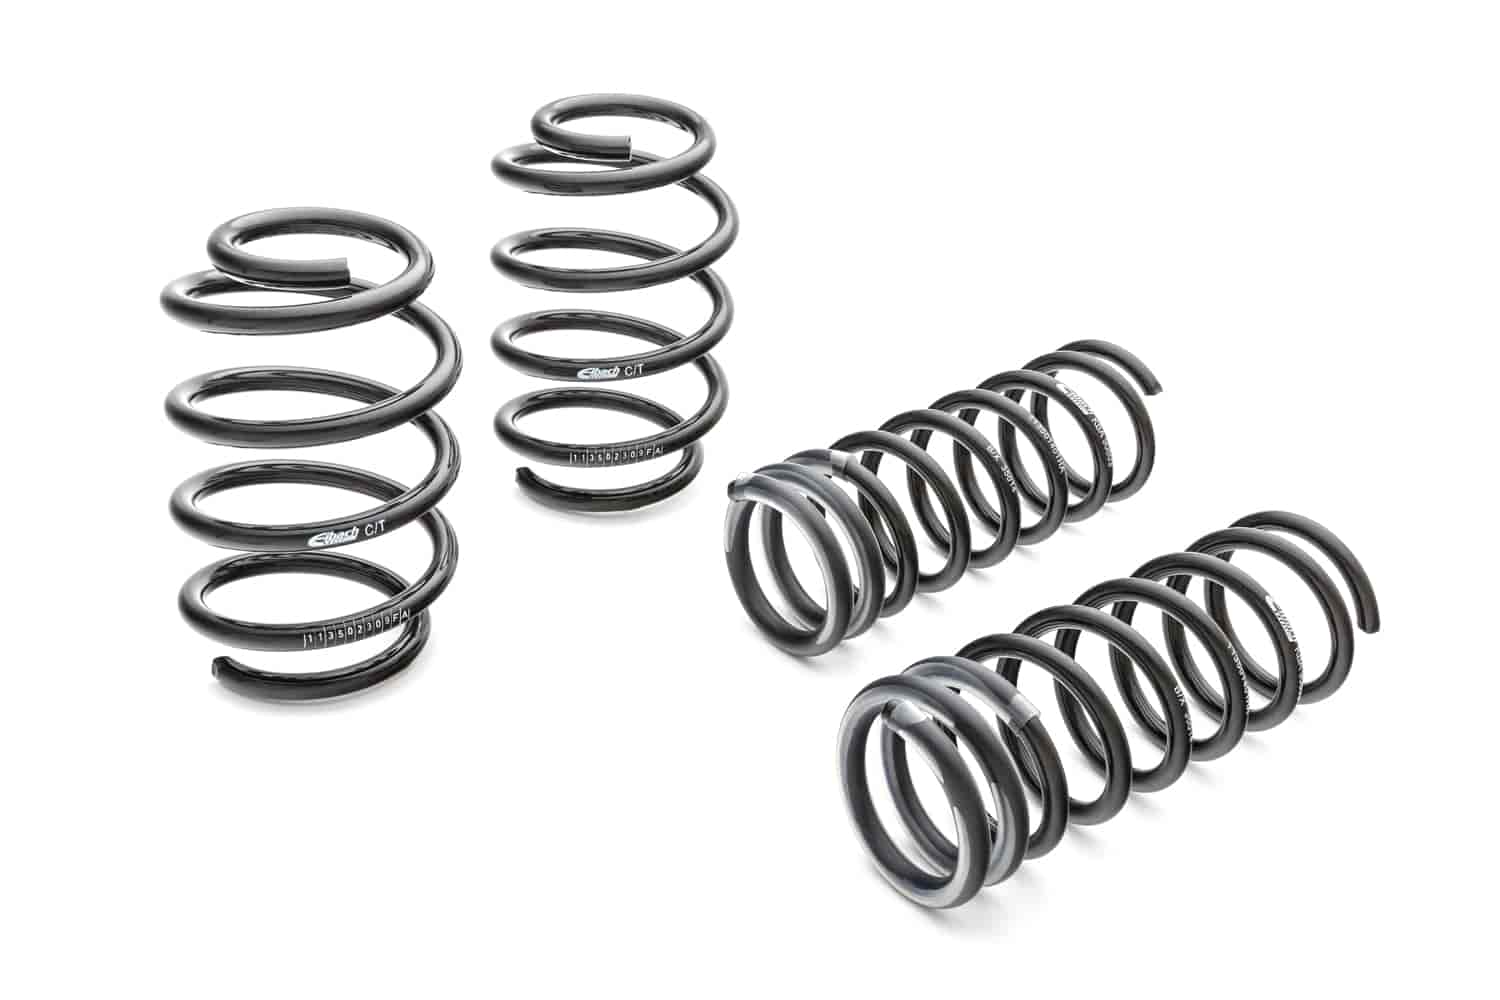 E10-20-031-01-22 Pro-Kit Lowering Springs 2012-2016 BMW 328i - 1.100 in. Front/1 in. Rear Drop